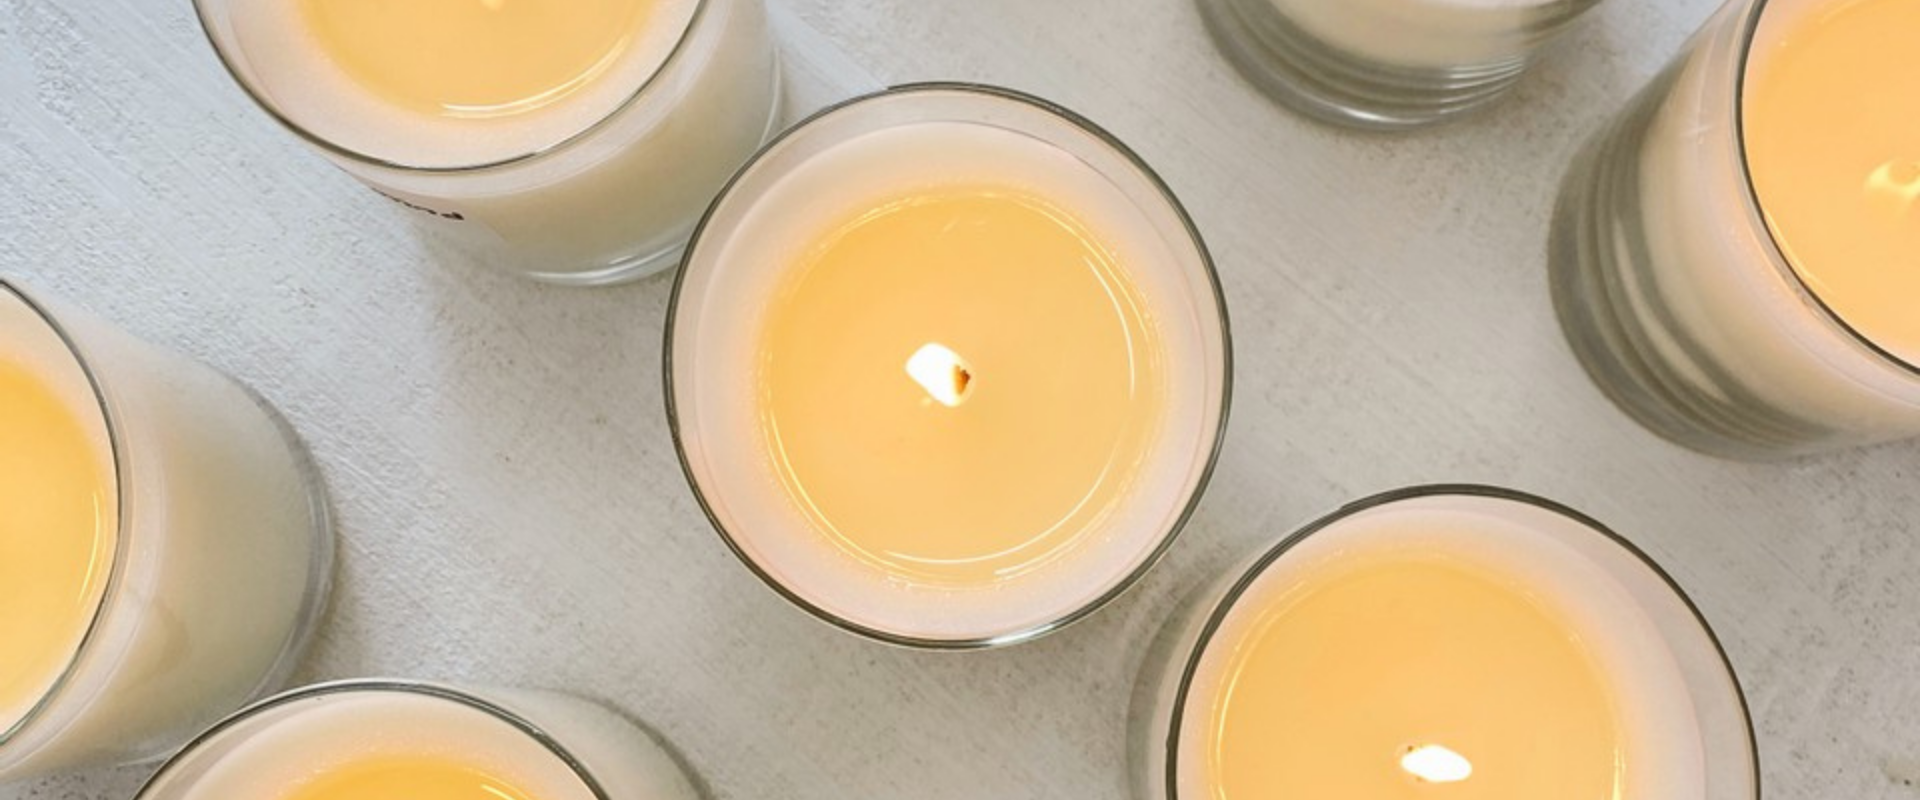 How to Make Lotion Candles 